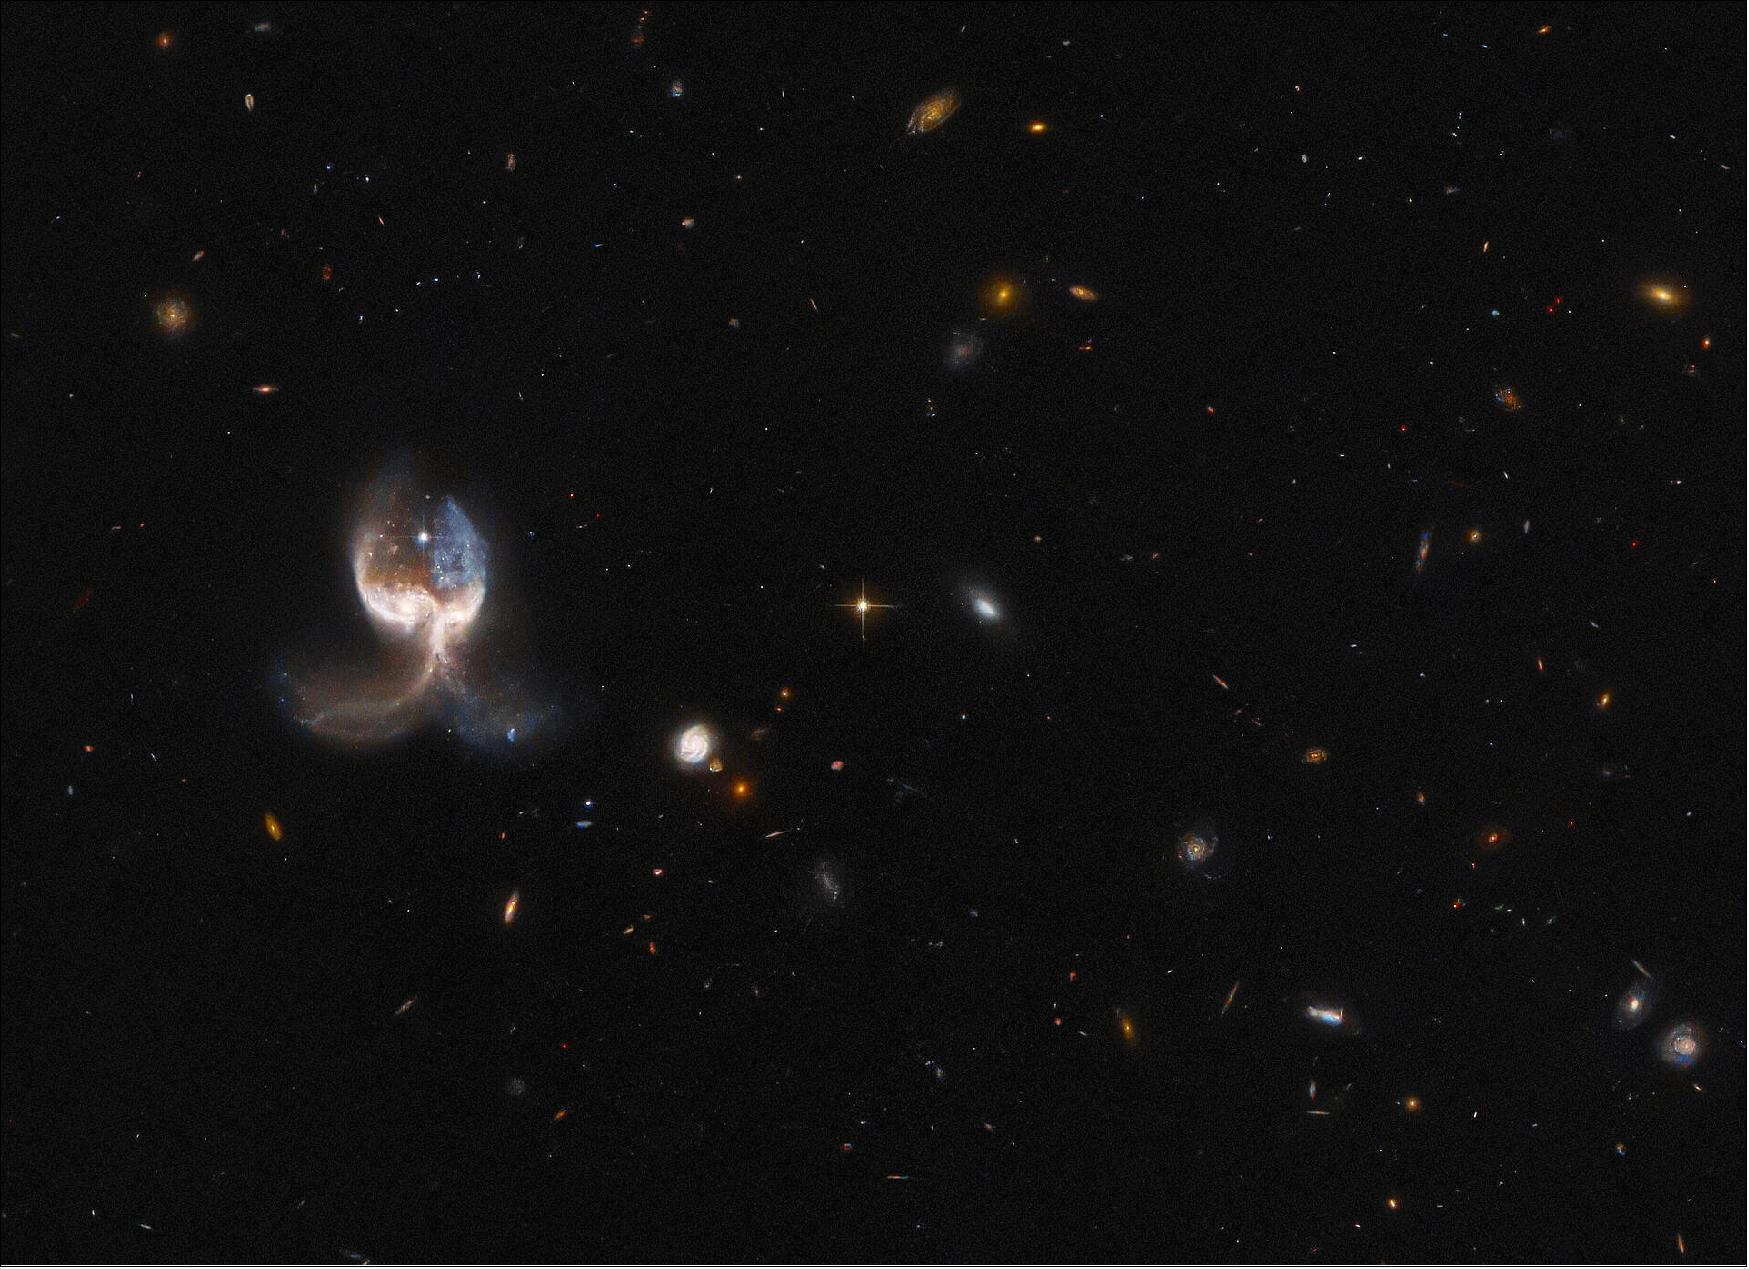 Figure 51: This angelic image comes from a set of Hubble observations inspecting the highlights of the Galaxy Zoo citizen science project. This crowdsourced astronomy project relied on hundreds of thousands of volunteers to classify galaxies and help astronomers wade through a deluge of data from robotic telescopes. In the process, volunteers discovered a rogues’ gallery of weird and wonderful galaxy types, some of which had not previously been studied. A similar, ongoing project called Radio Galaxy Zoo: LOFAR is using the same crowdsourcing approach to locate supermassive black holes in distant galaxies. Noteworthy objects from both projects were chosen for detailed follow-up observations with Hubble’s Advanced Camera for Surveys. In keeping with the crowdsourced nature of the Galaxy Zoo project, the targets for follow-up observations with Hubble were chosen via roughly 18,000 votes cast by the public. The selected targets include ring-shaped galaxies, unusual spirals, and a striking selection of galaxy mergers such as VV689 (image credit: ESA/Hubble & NASA, W. Keel.; CC BY 4.0 Acknowledgement: J. Schmidt)